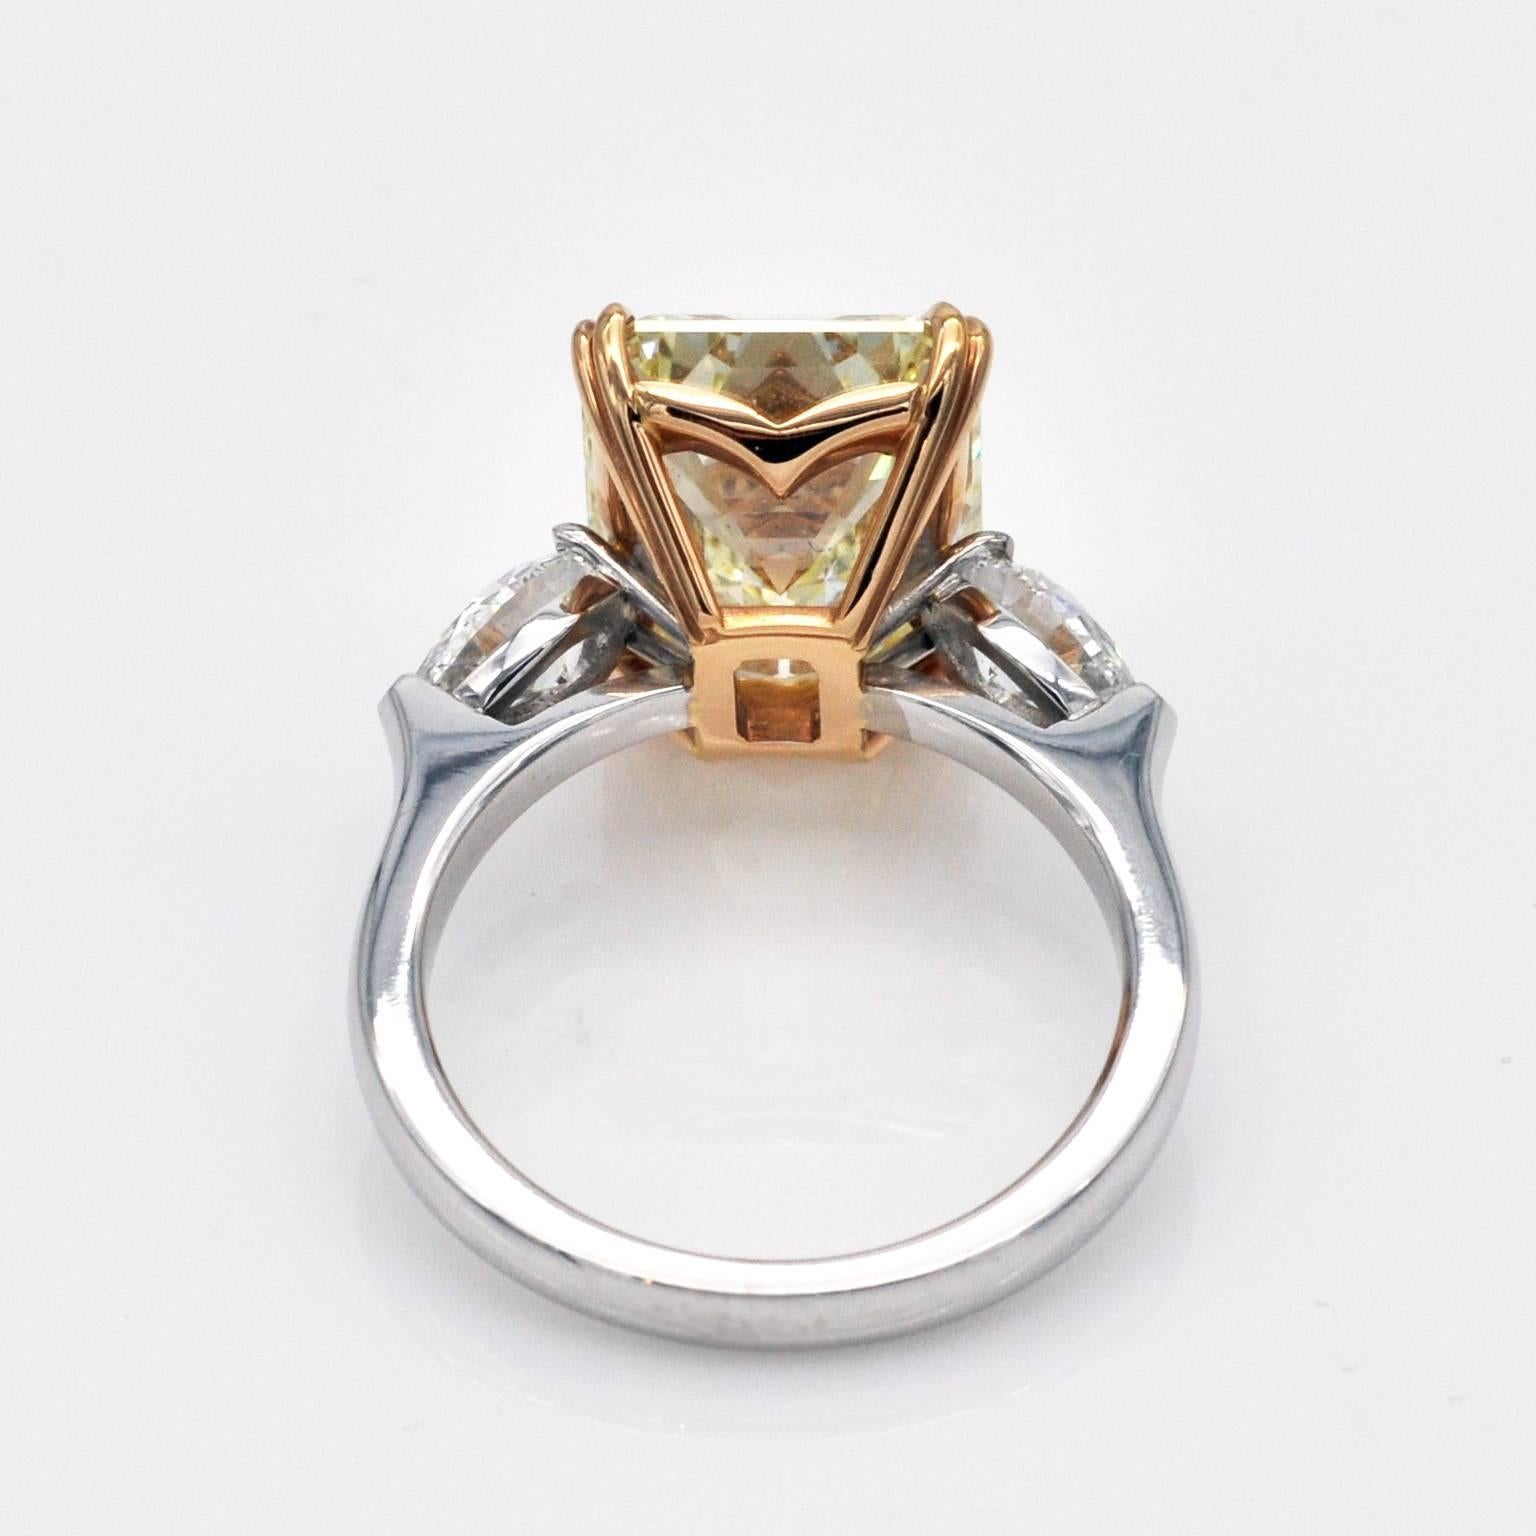 Contemporary 7.66 Carat GIA Certified Fancy Yellow Emerald Cut Diamond Gold Solitaire Ring